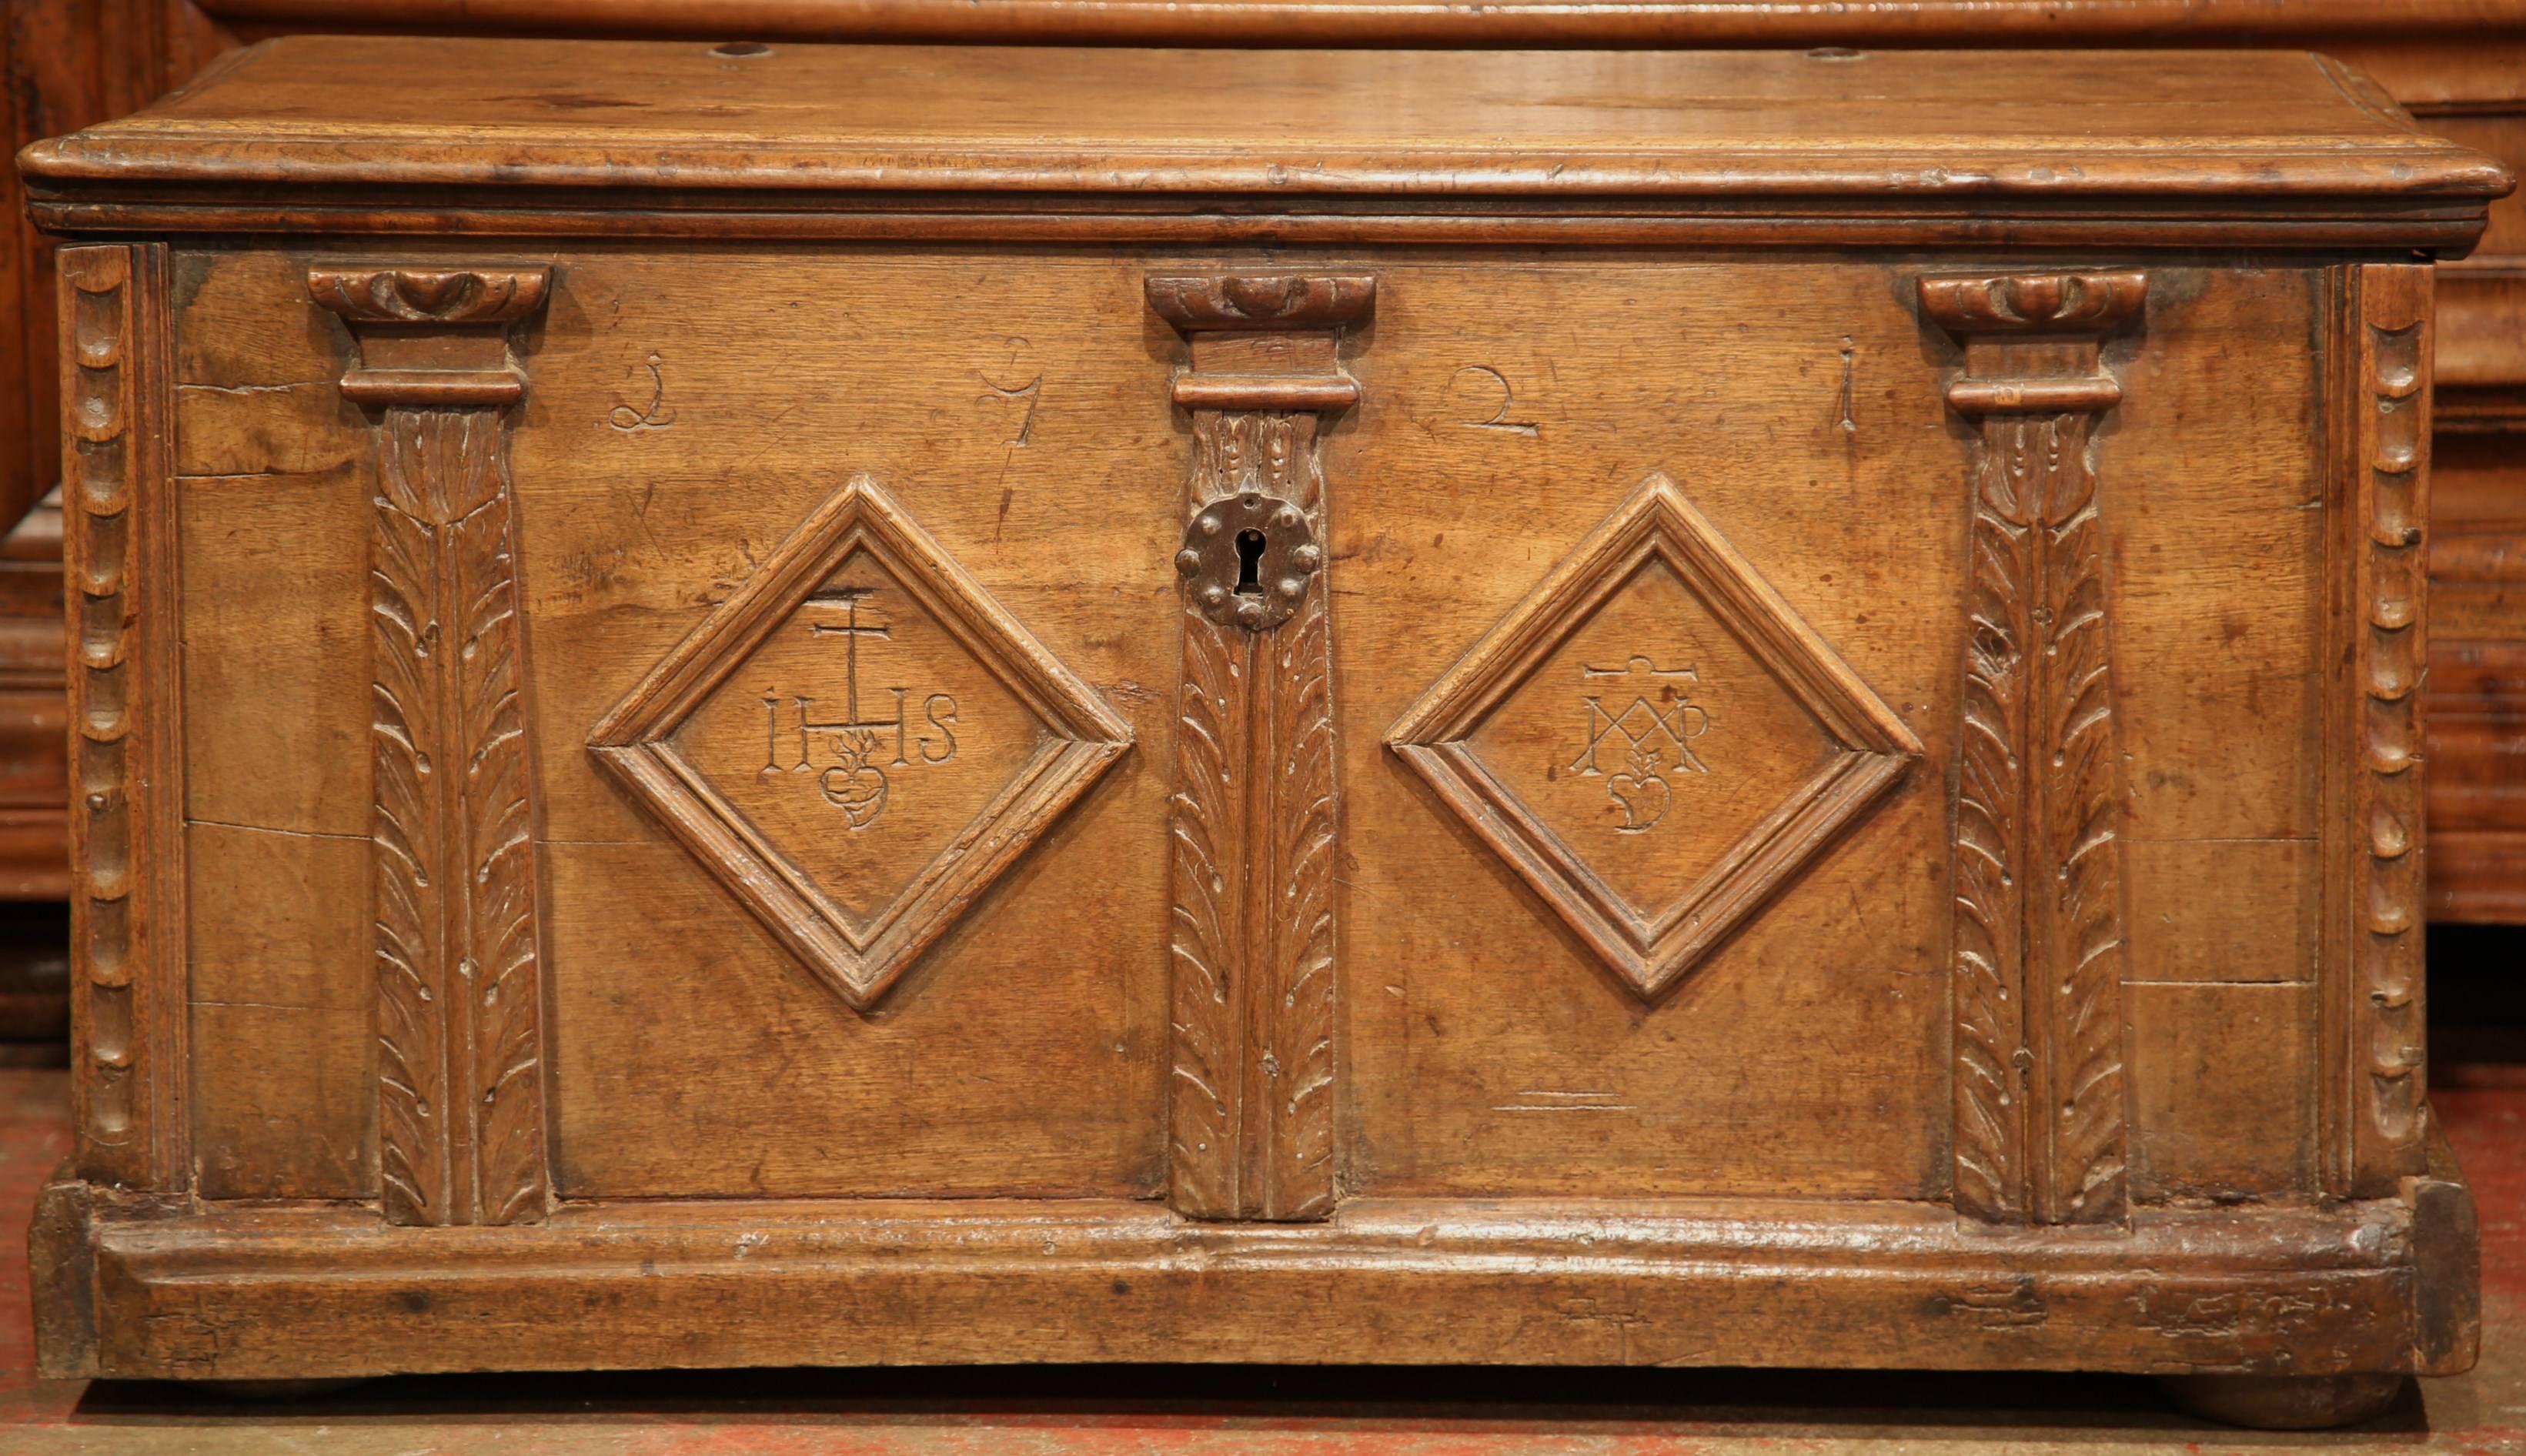 Store your winter blankets in this antique fruitwood trunk from the Perigord region of France. Crafted in the 17th century, circa 1660, this cabinet features two diamond shapes design across the front along with some initials, numbers and other